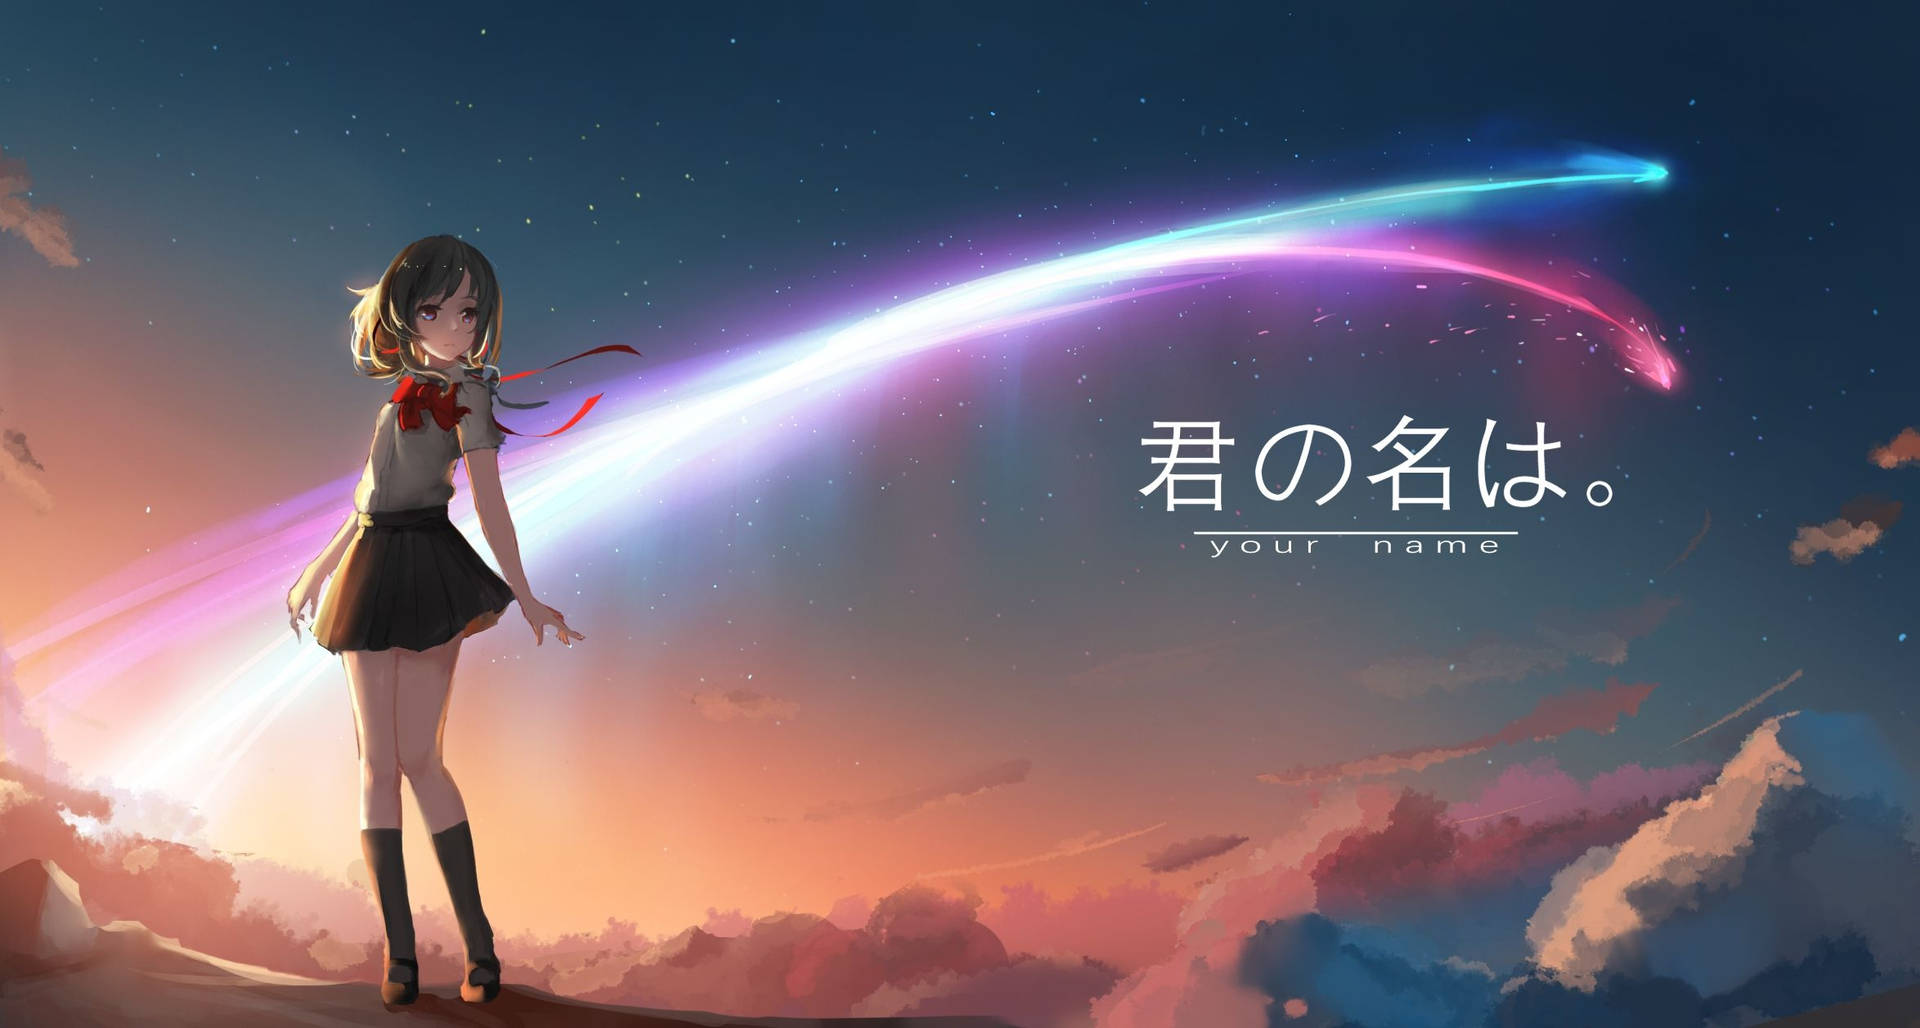 Your Name Mitsuha And The Comet Background